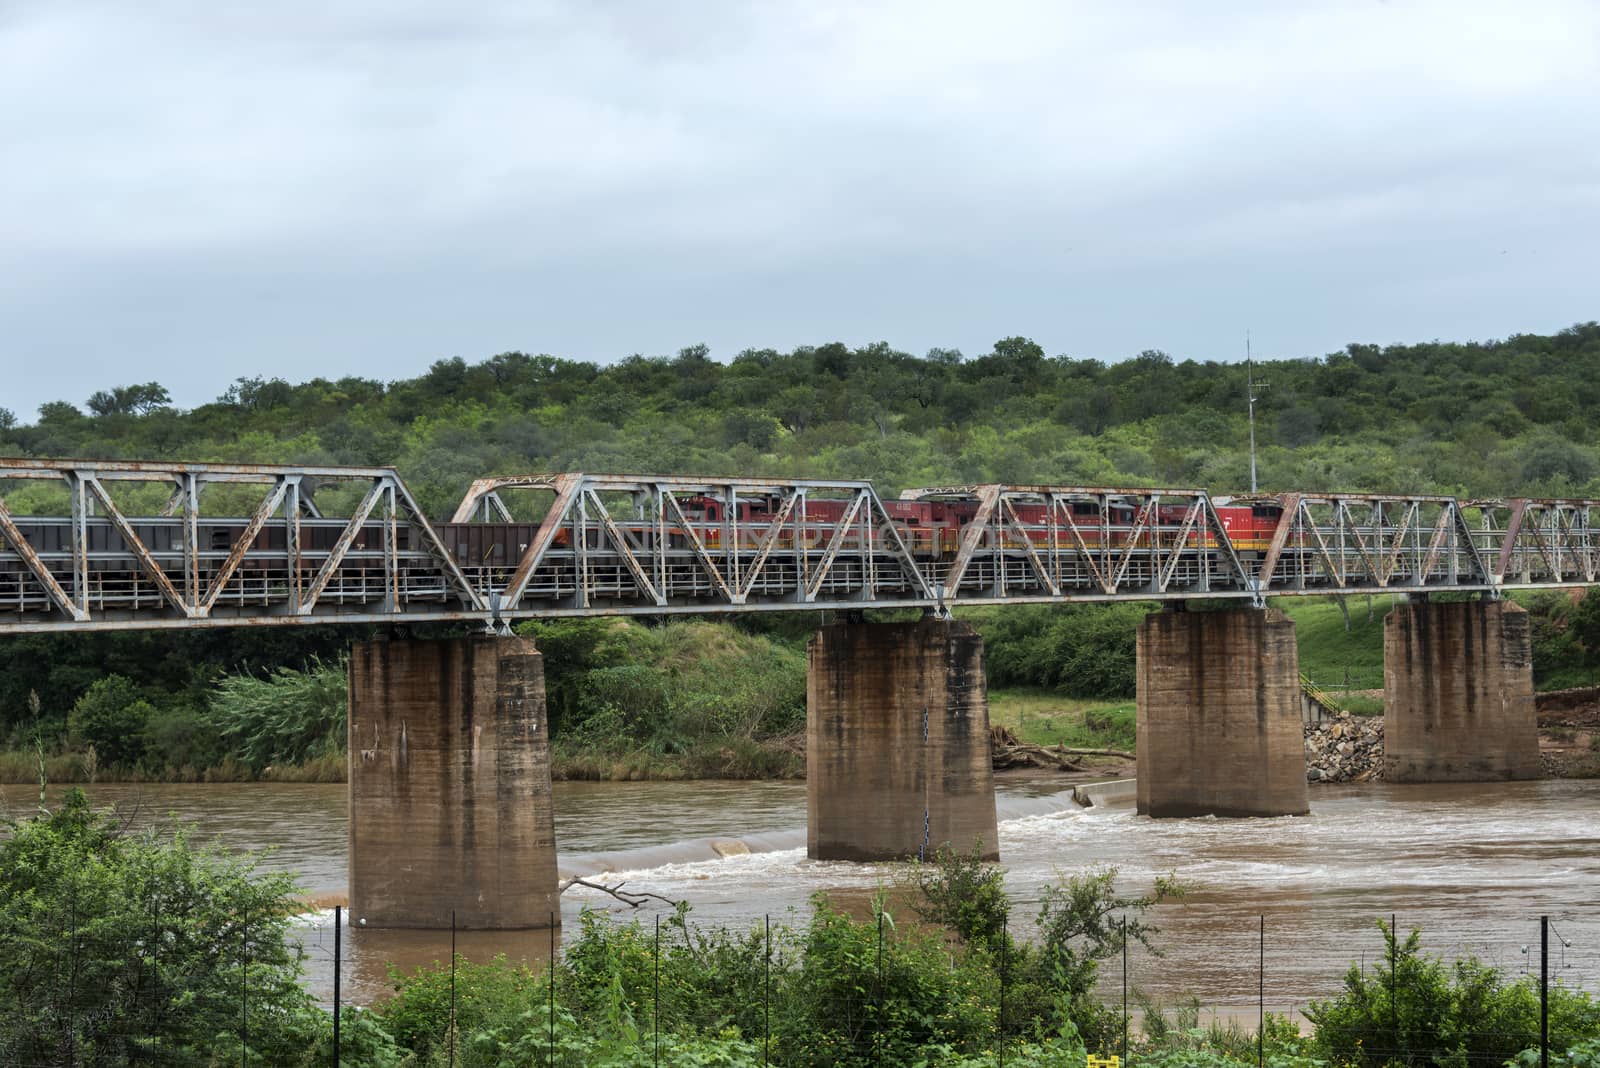 old train crossing the elephants river in south africa by compuinfoto